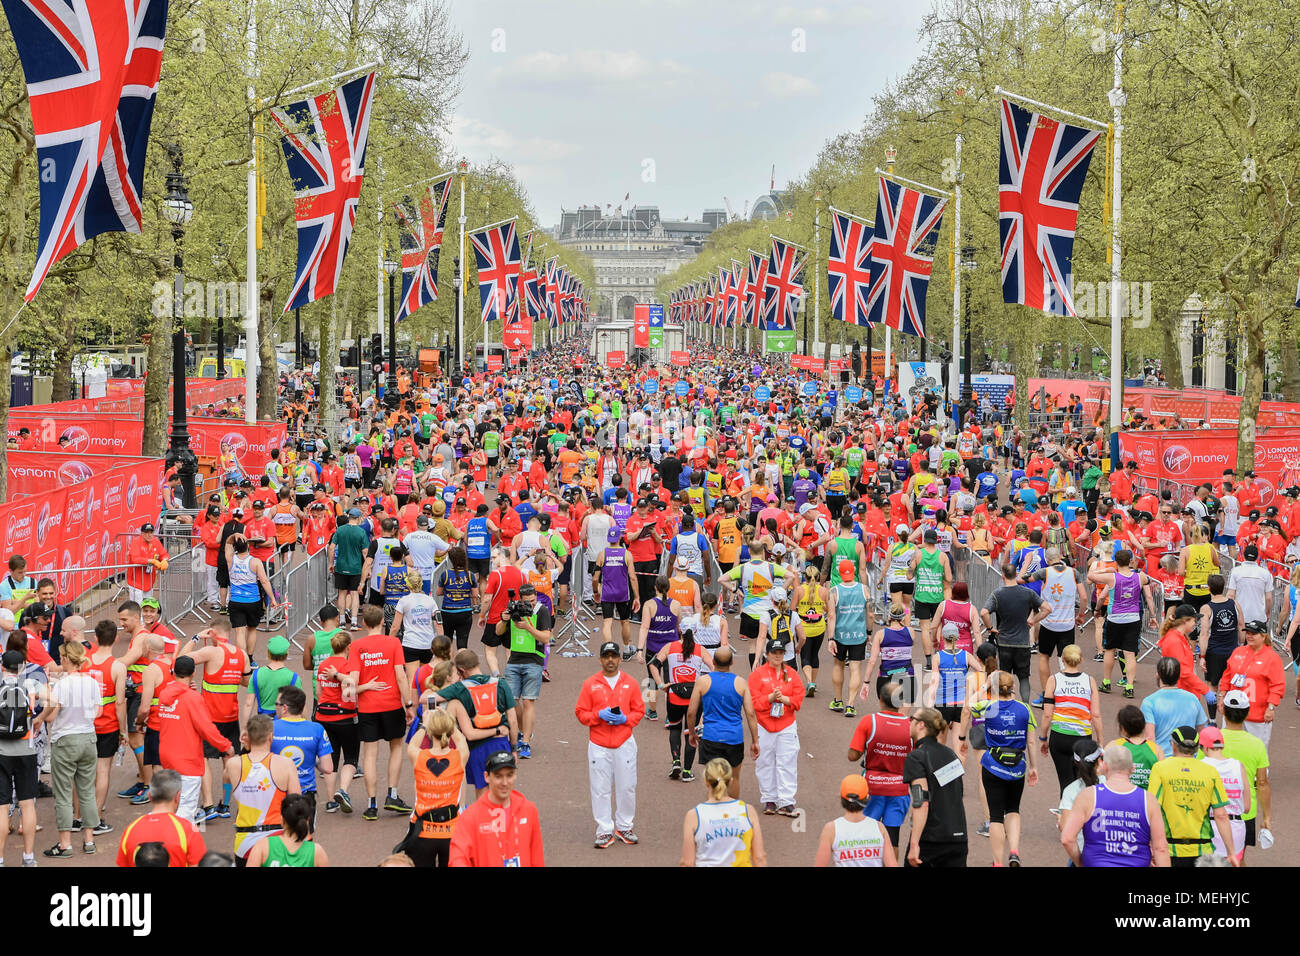 London, UK, 22 April 2018: Mass Race runners approach the finish at The Mall during the 2018 Virgin Money London Marathon on Sunday, 22 April 2018. London, England. Credit: Taka G Wu Stock Photo